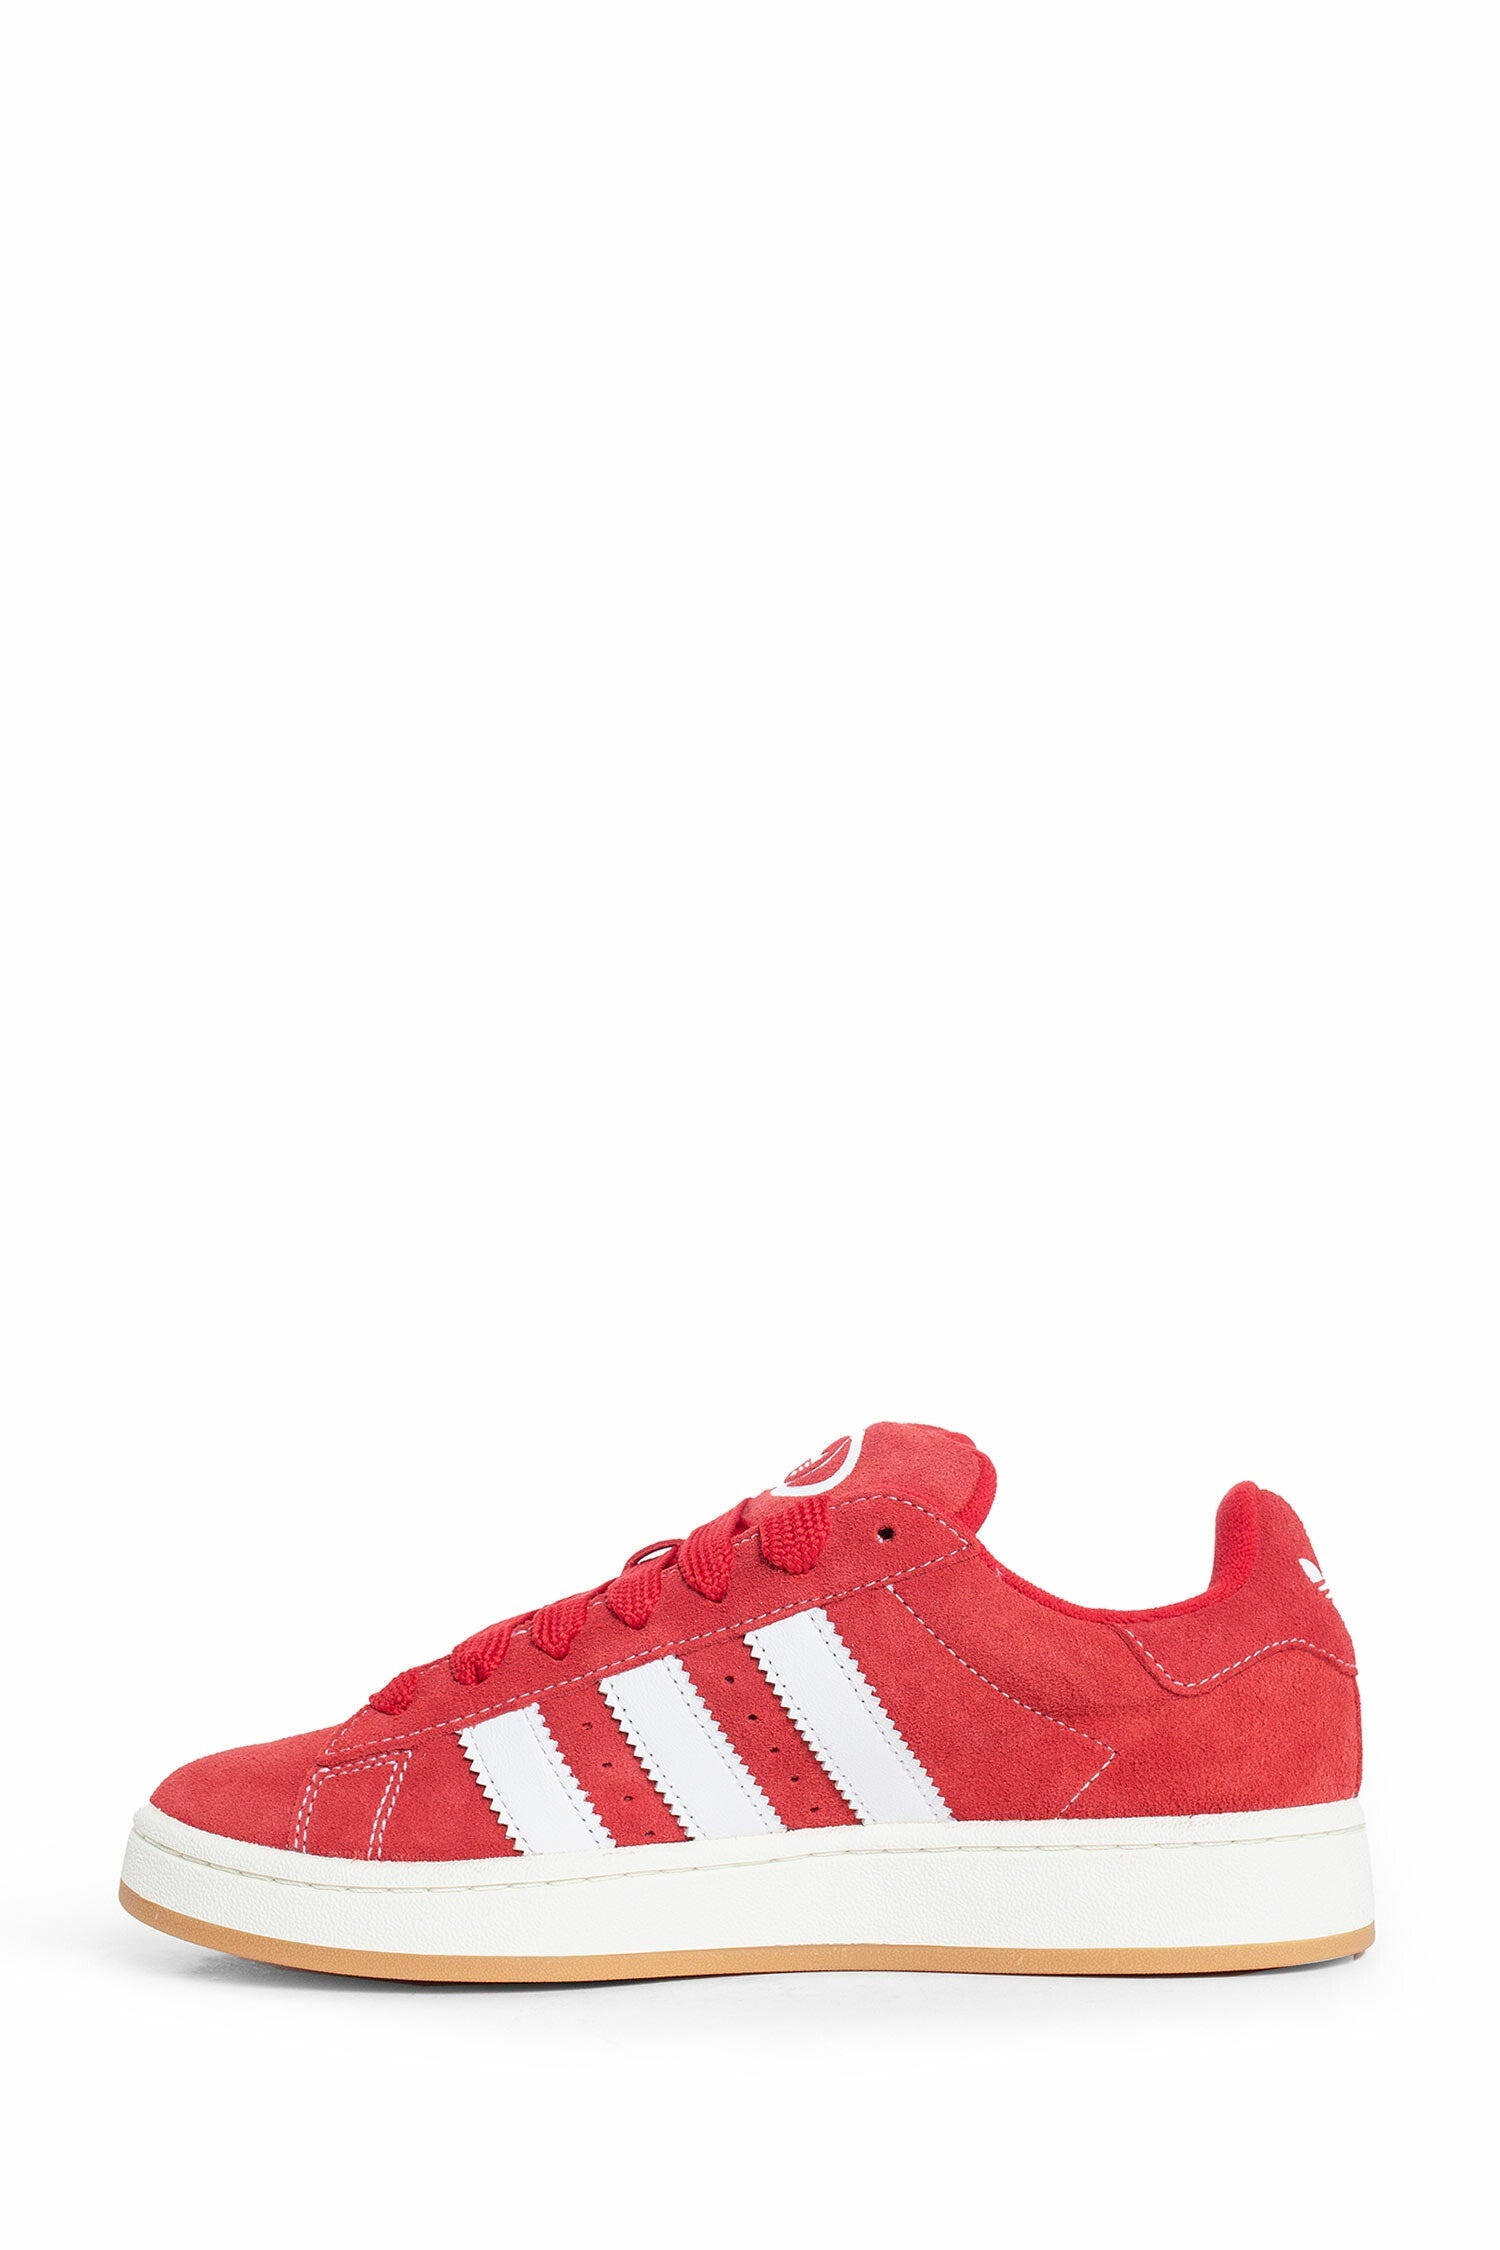 ADIDAS UNISEX RED SNEAKERS - 4